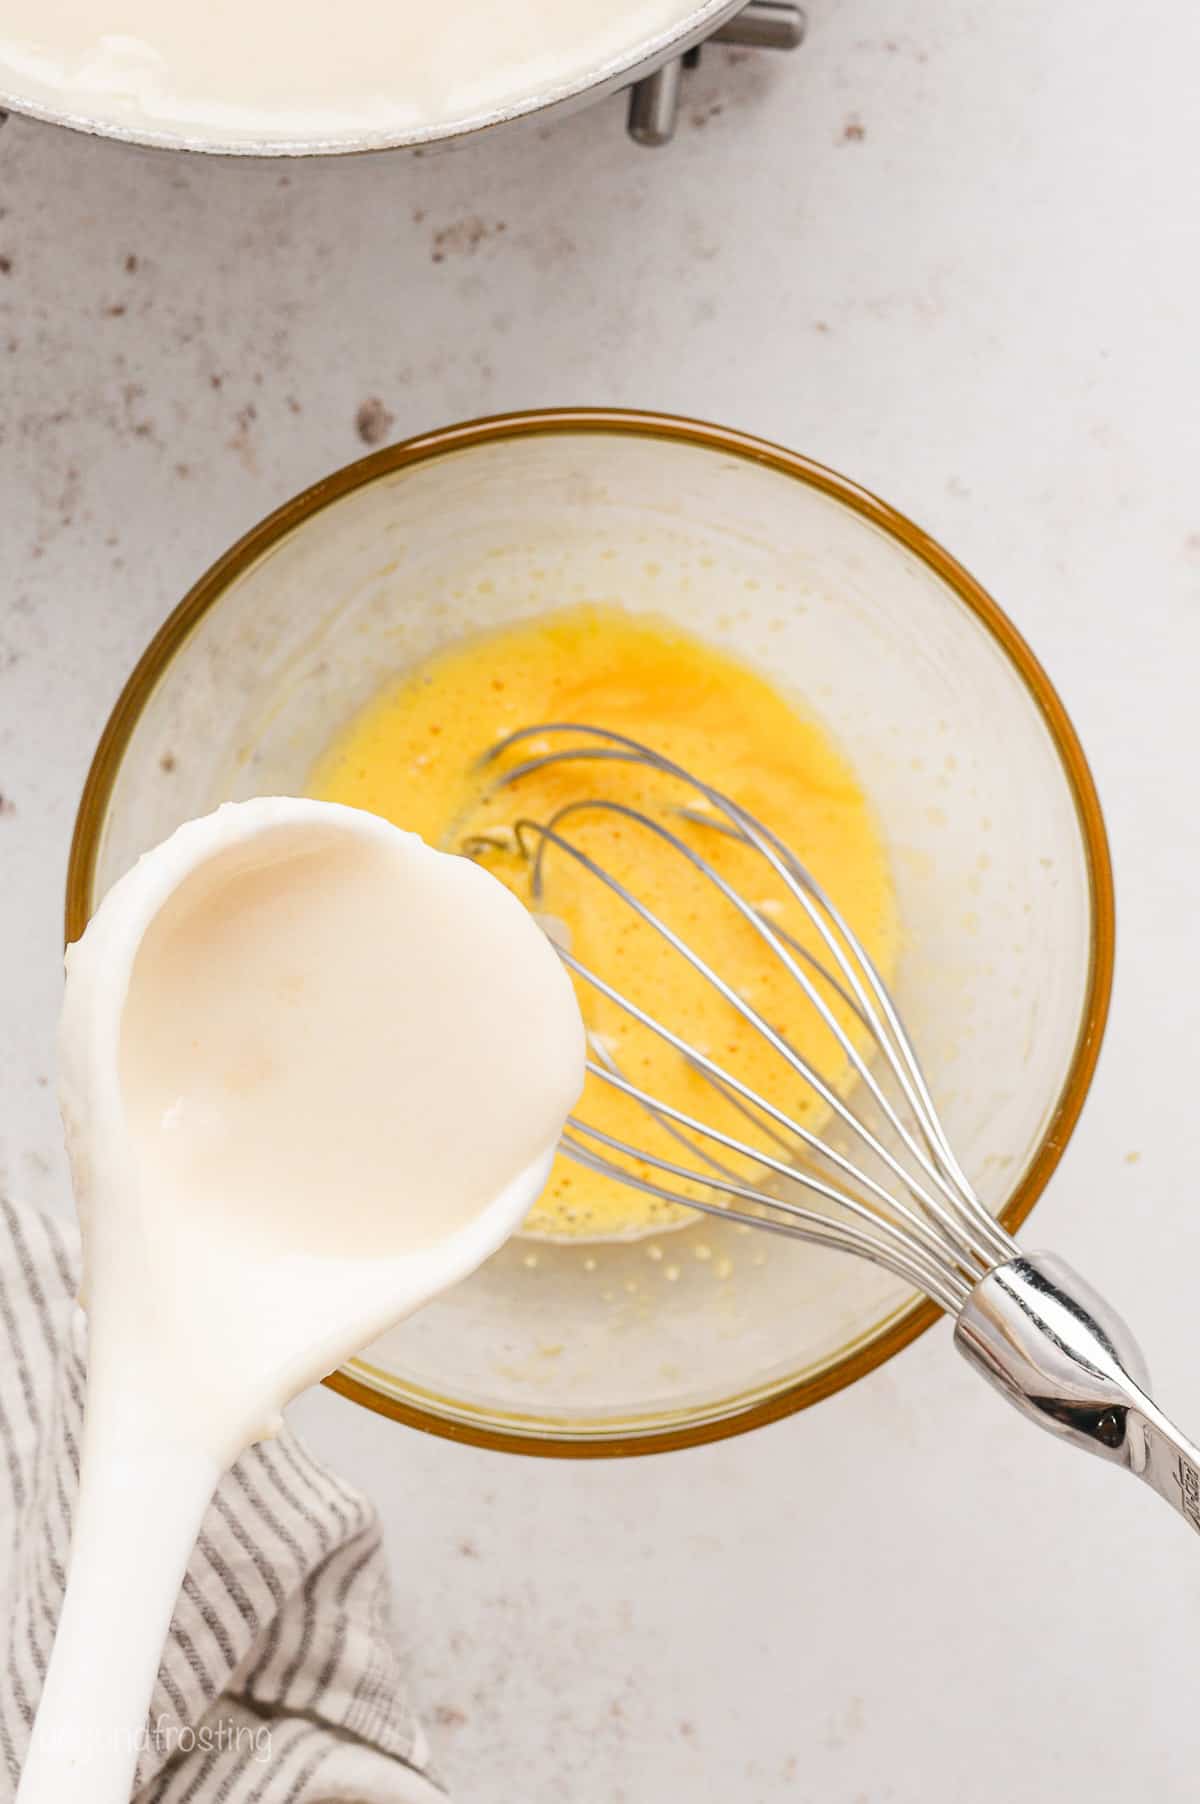 A half cup of filling mixture is poured over a whisk resting in a bowl of beaten eggs.